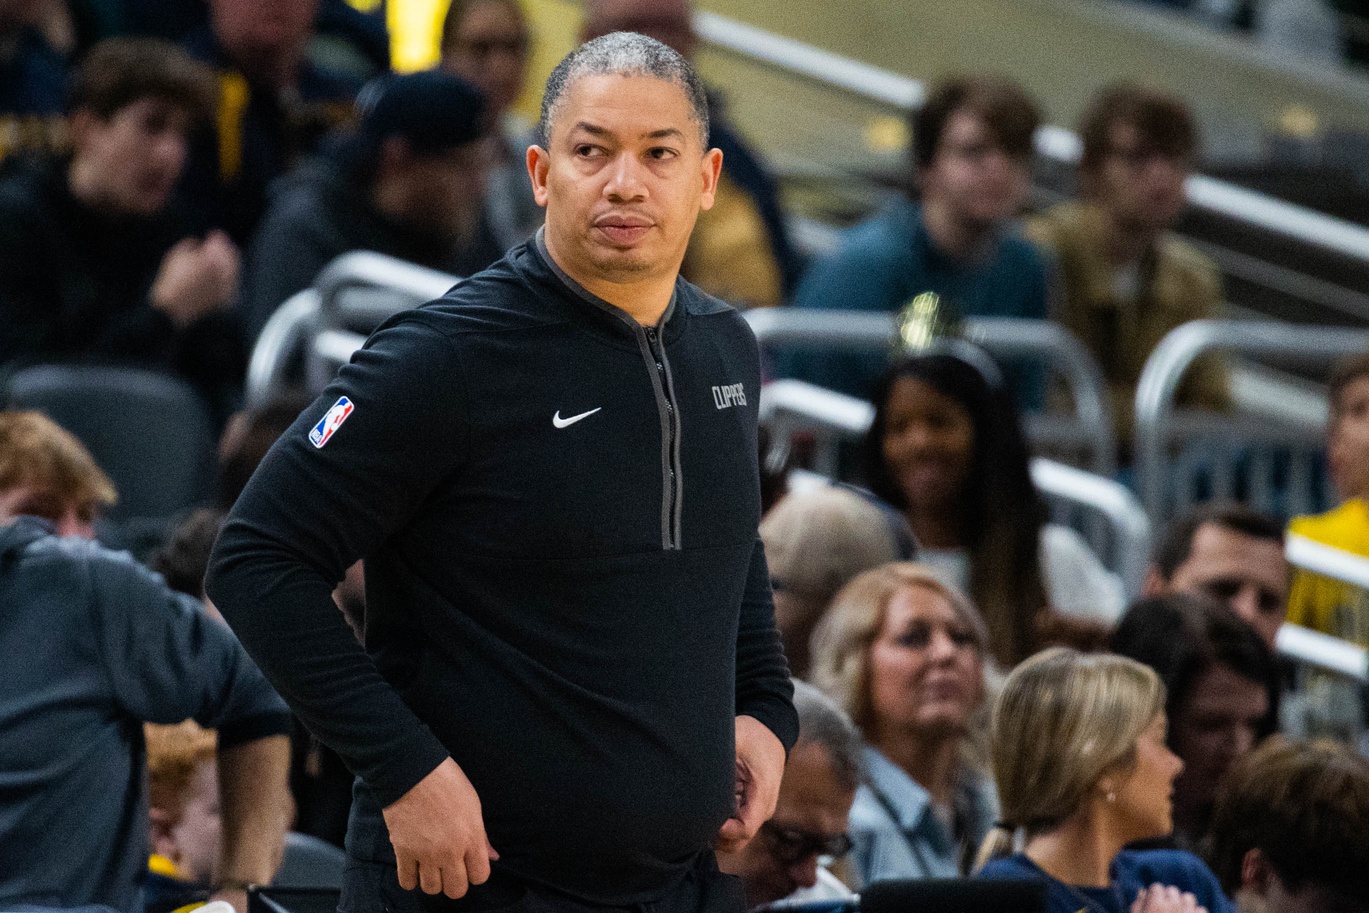 The LA Clippers are true championship contenders thanks to Ty Lue and crew.